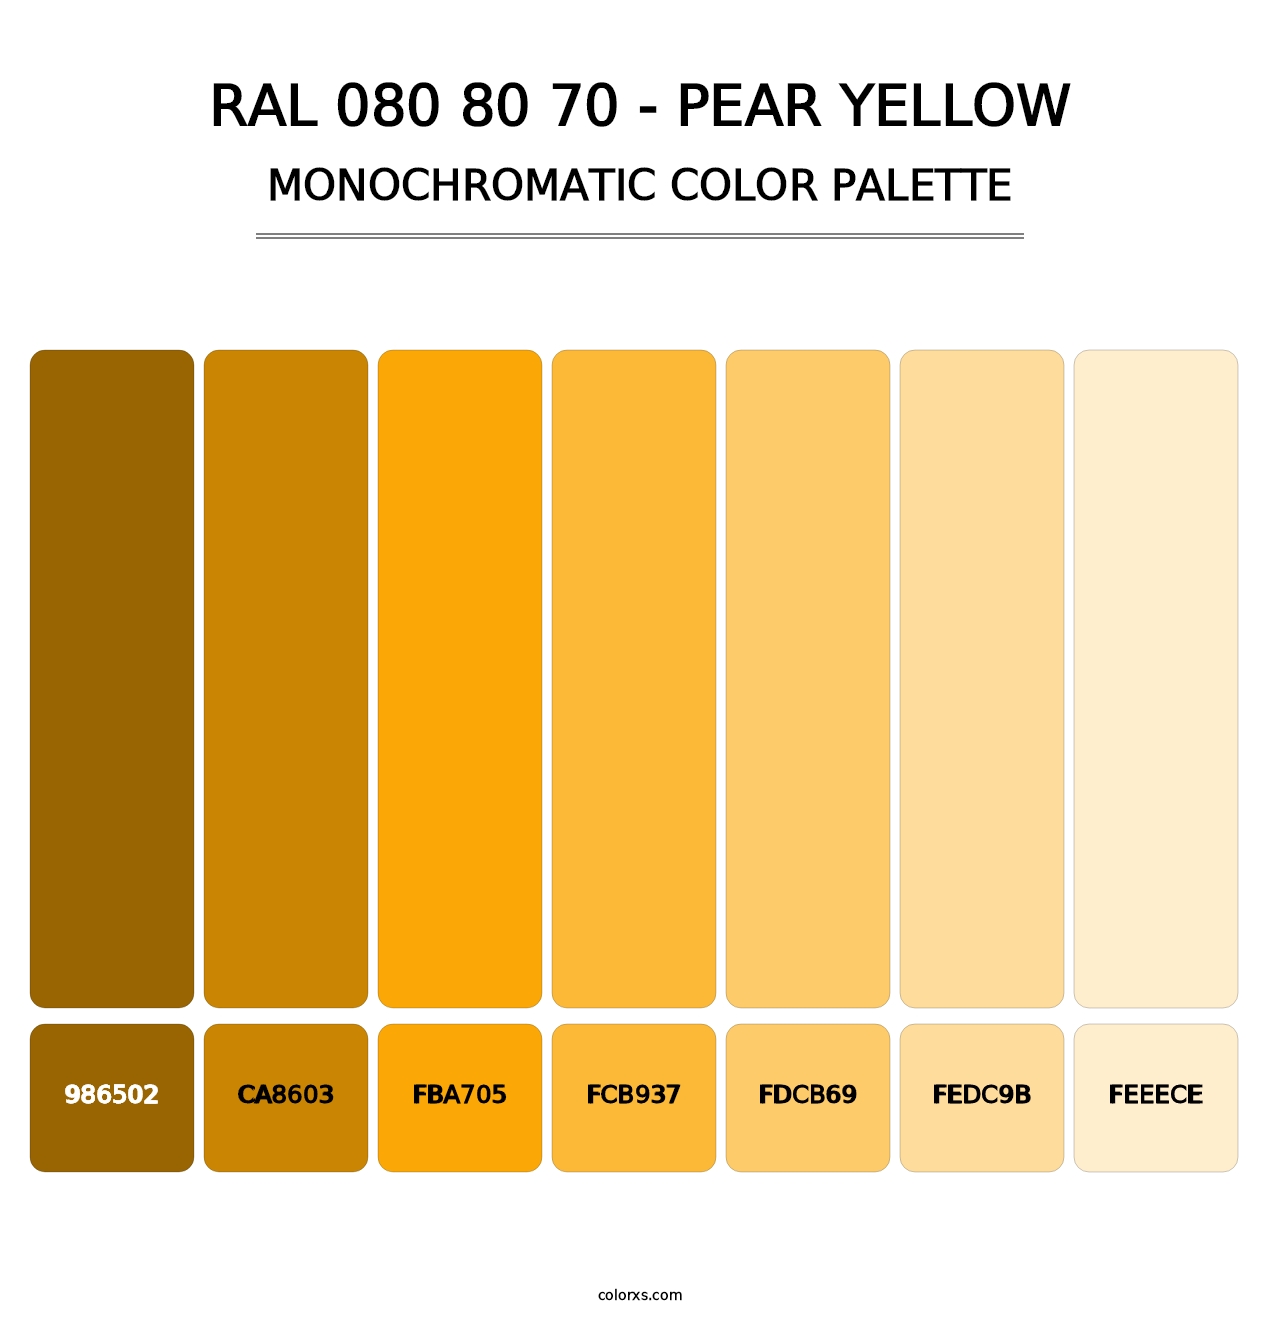 RAL 080 80 70 - Pear Yellow - Monochromatic Color Palette